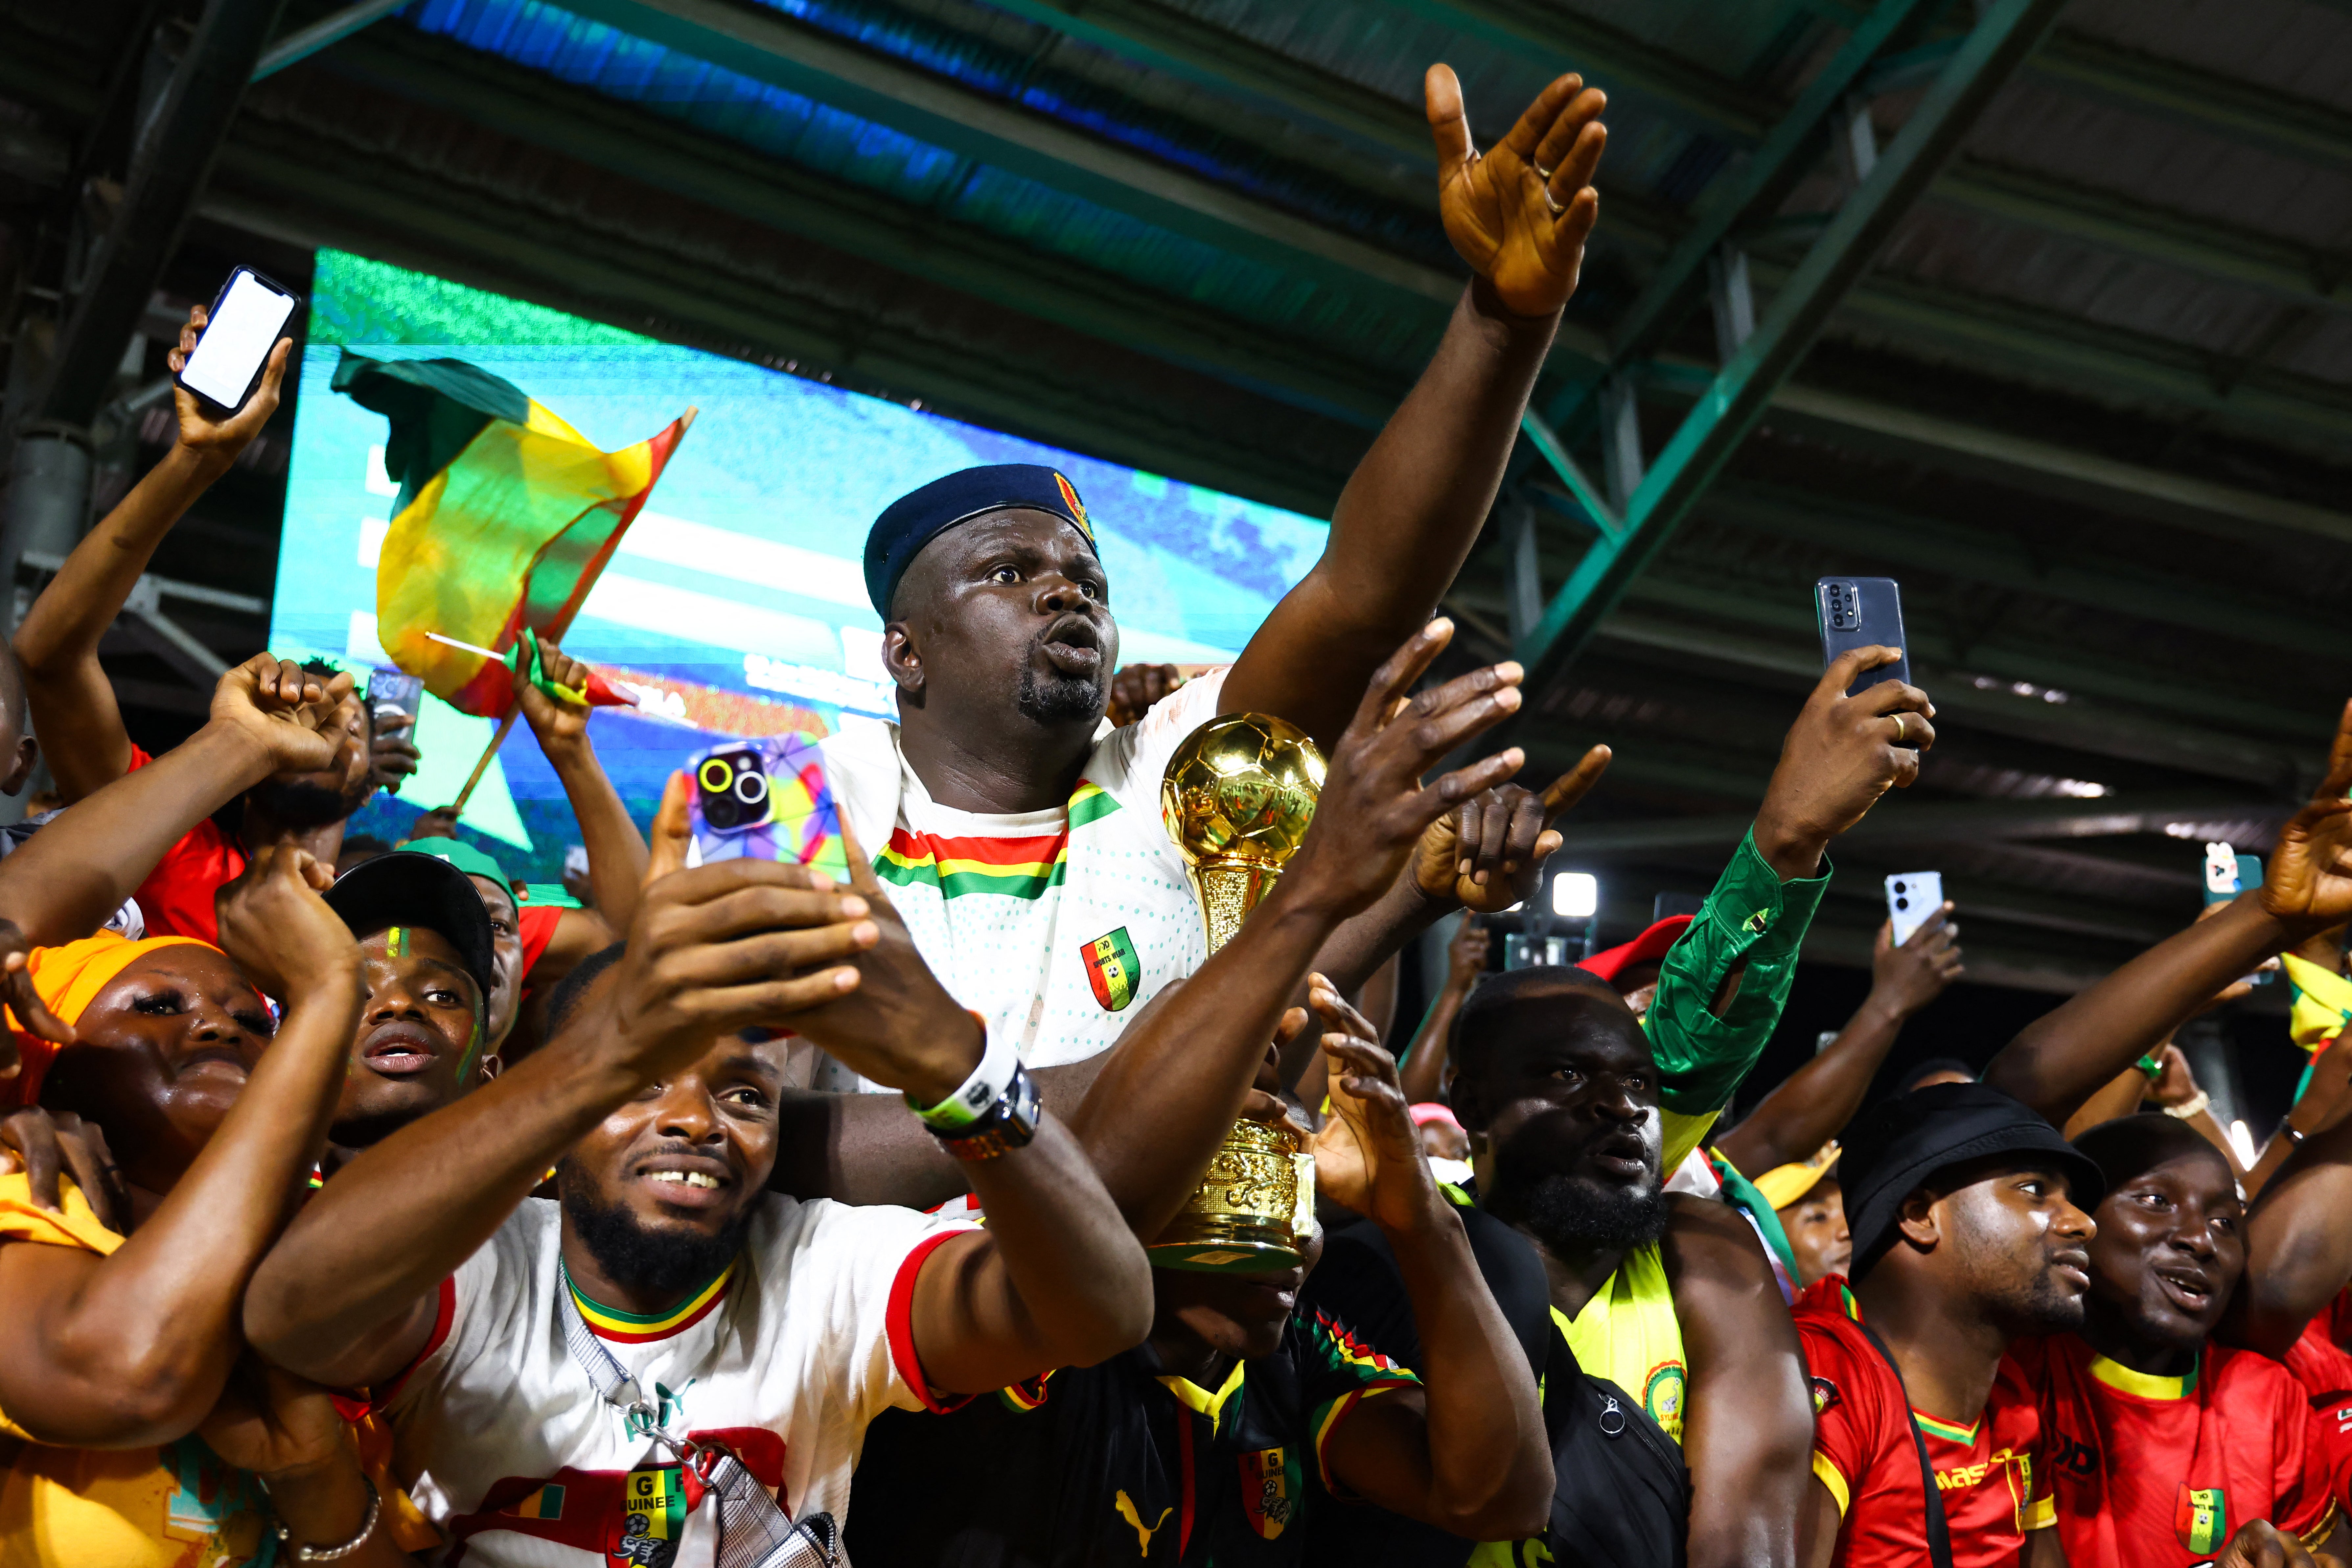 Guinea supporters cheer during their Afcon match against Gambia